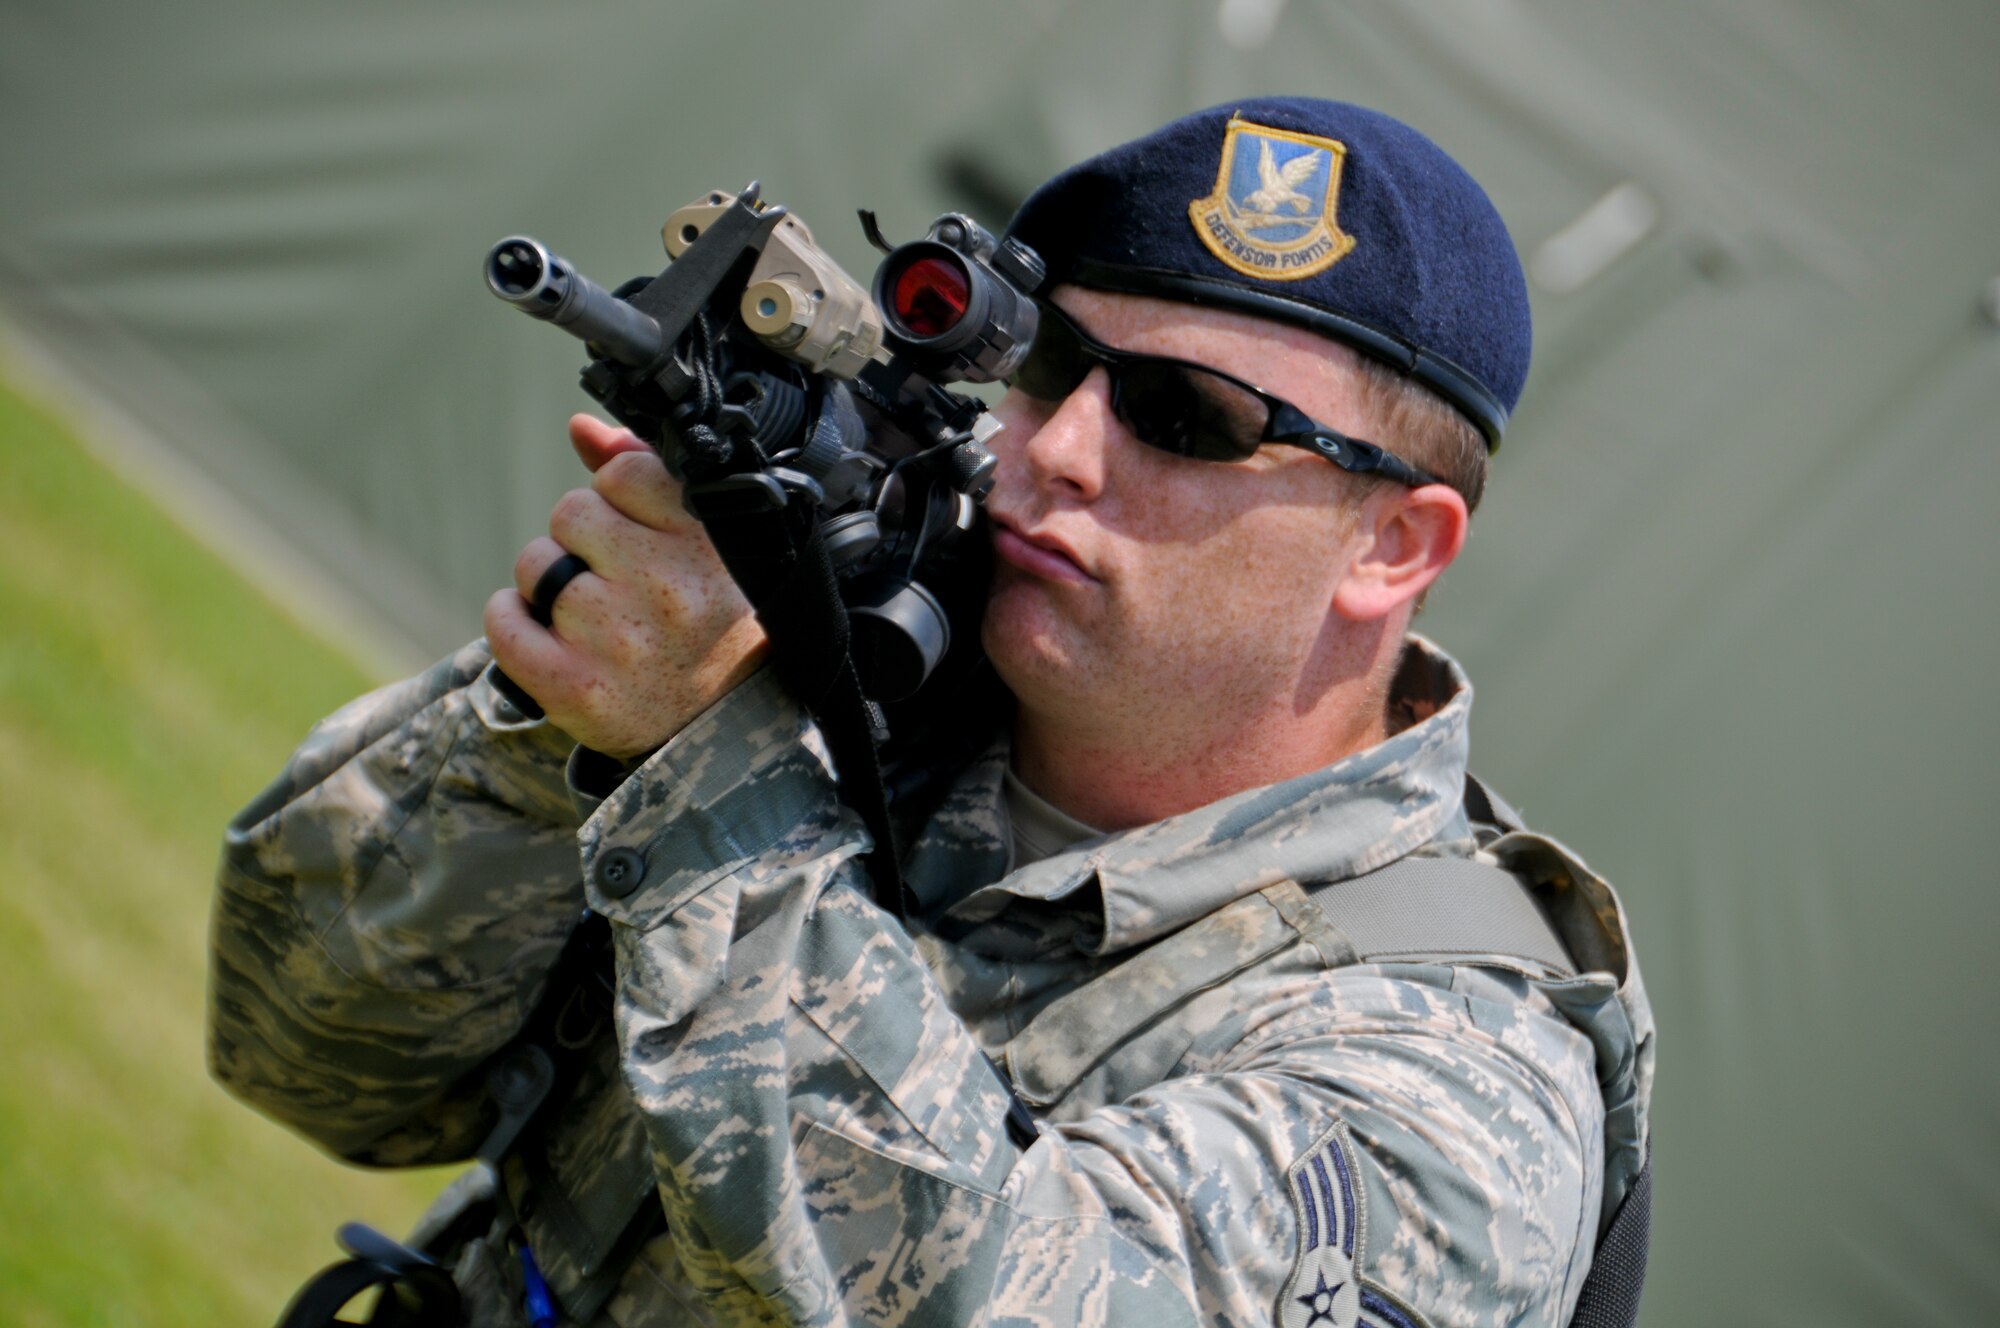 Members of the 188th Security Forces Squadron conduct shoot, move and communicate drills at Ebbing Air National Guard Base, Fort Smith, Ark. This weapon sustainment training is an annual requirement for Security Forces members aimed at increasing weapon deployment abilities of the team ands individual. (U.S. Air National Guard photo by Capt. Holli Nelson/Released)